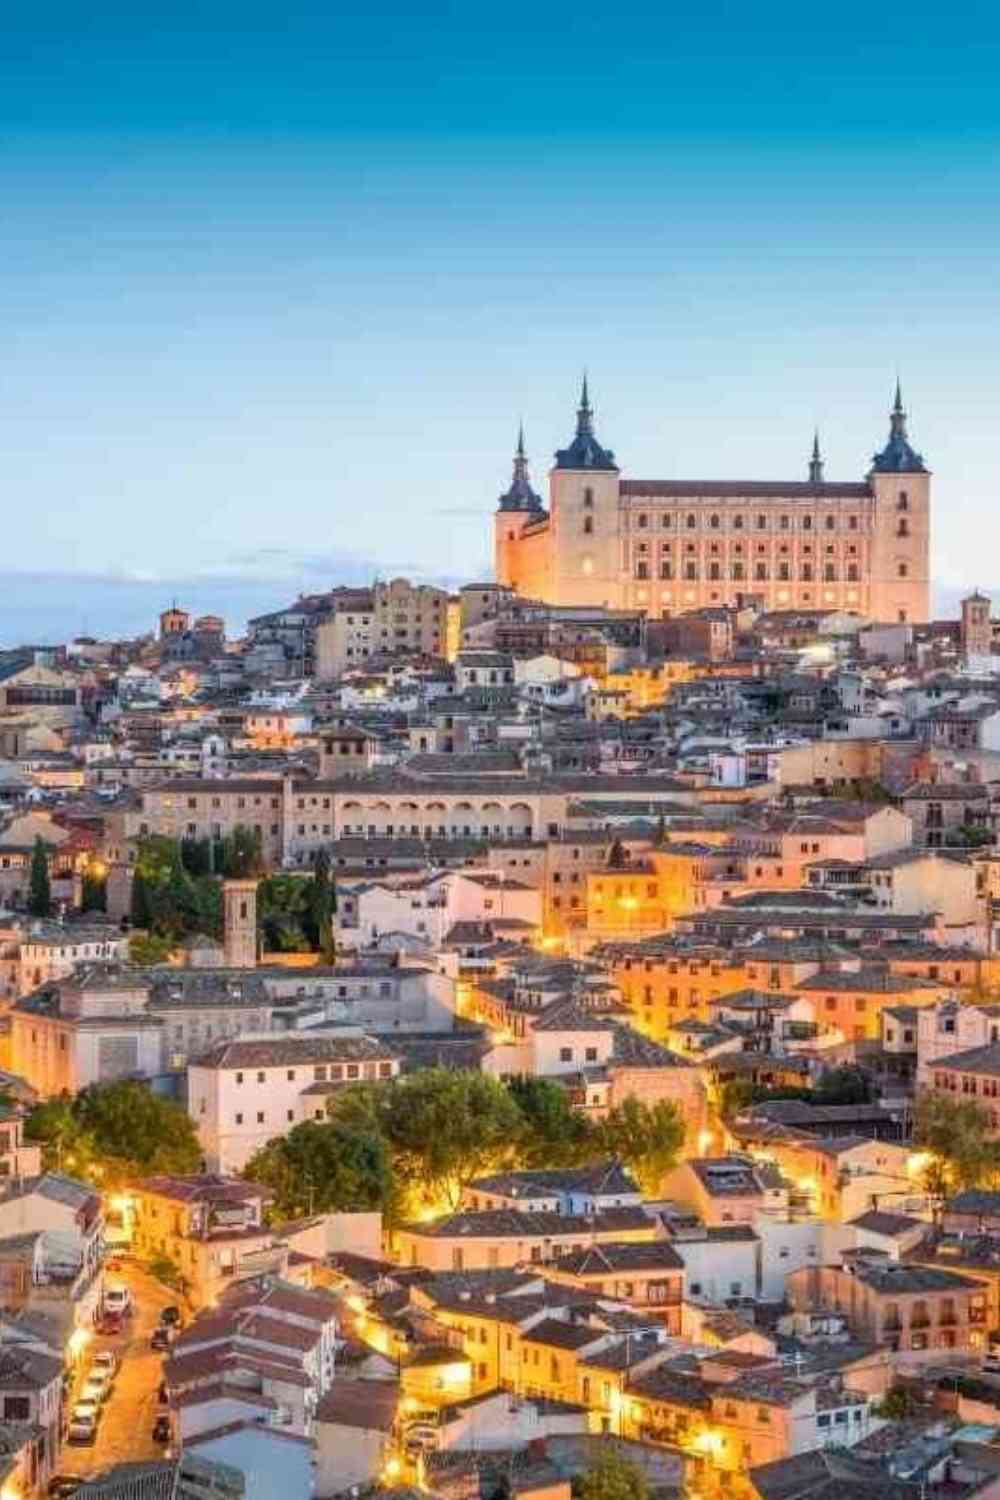 Toledo, Spain at sunset day trip idea from Madrid, Spain